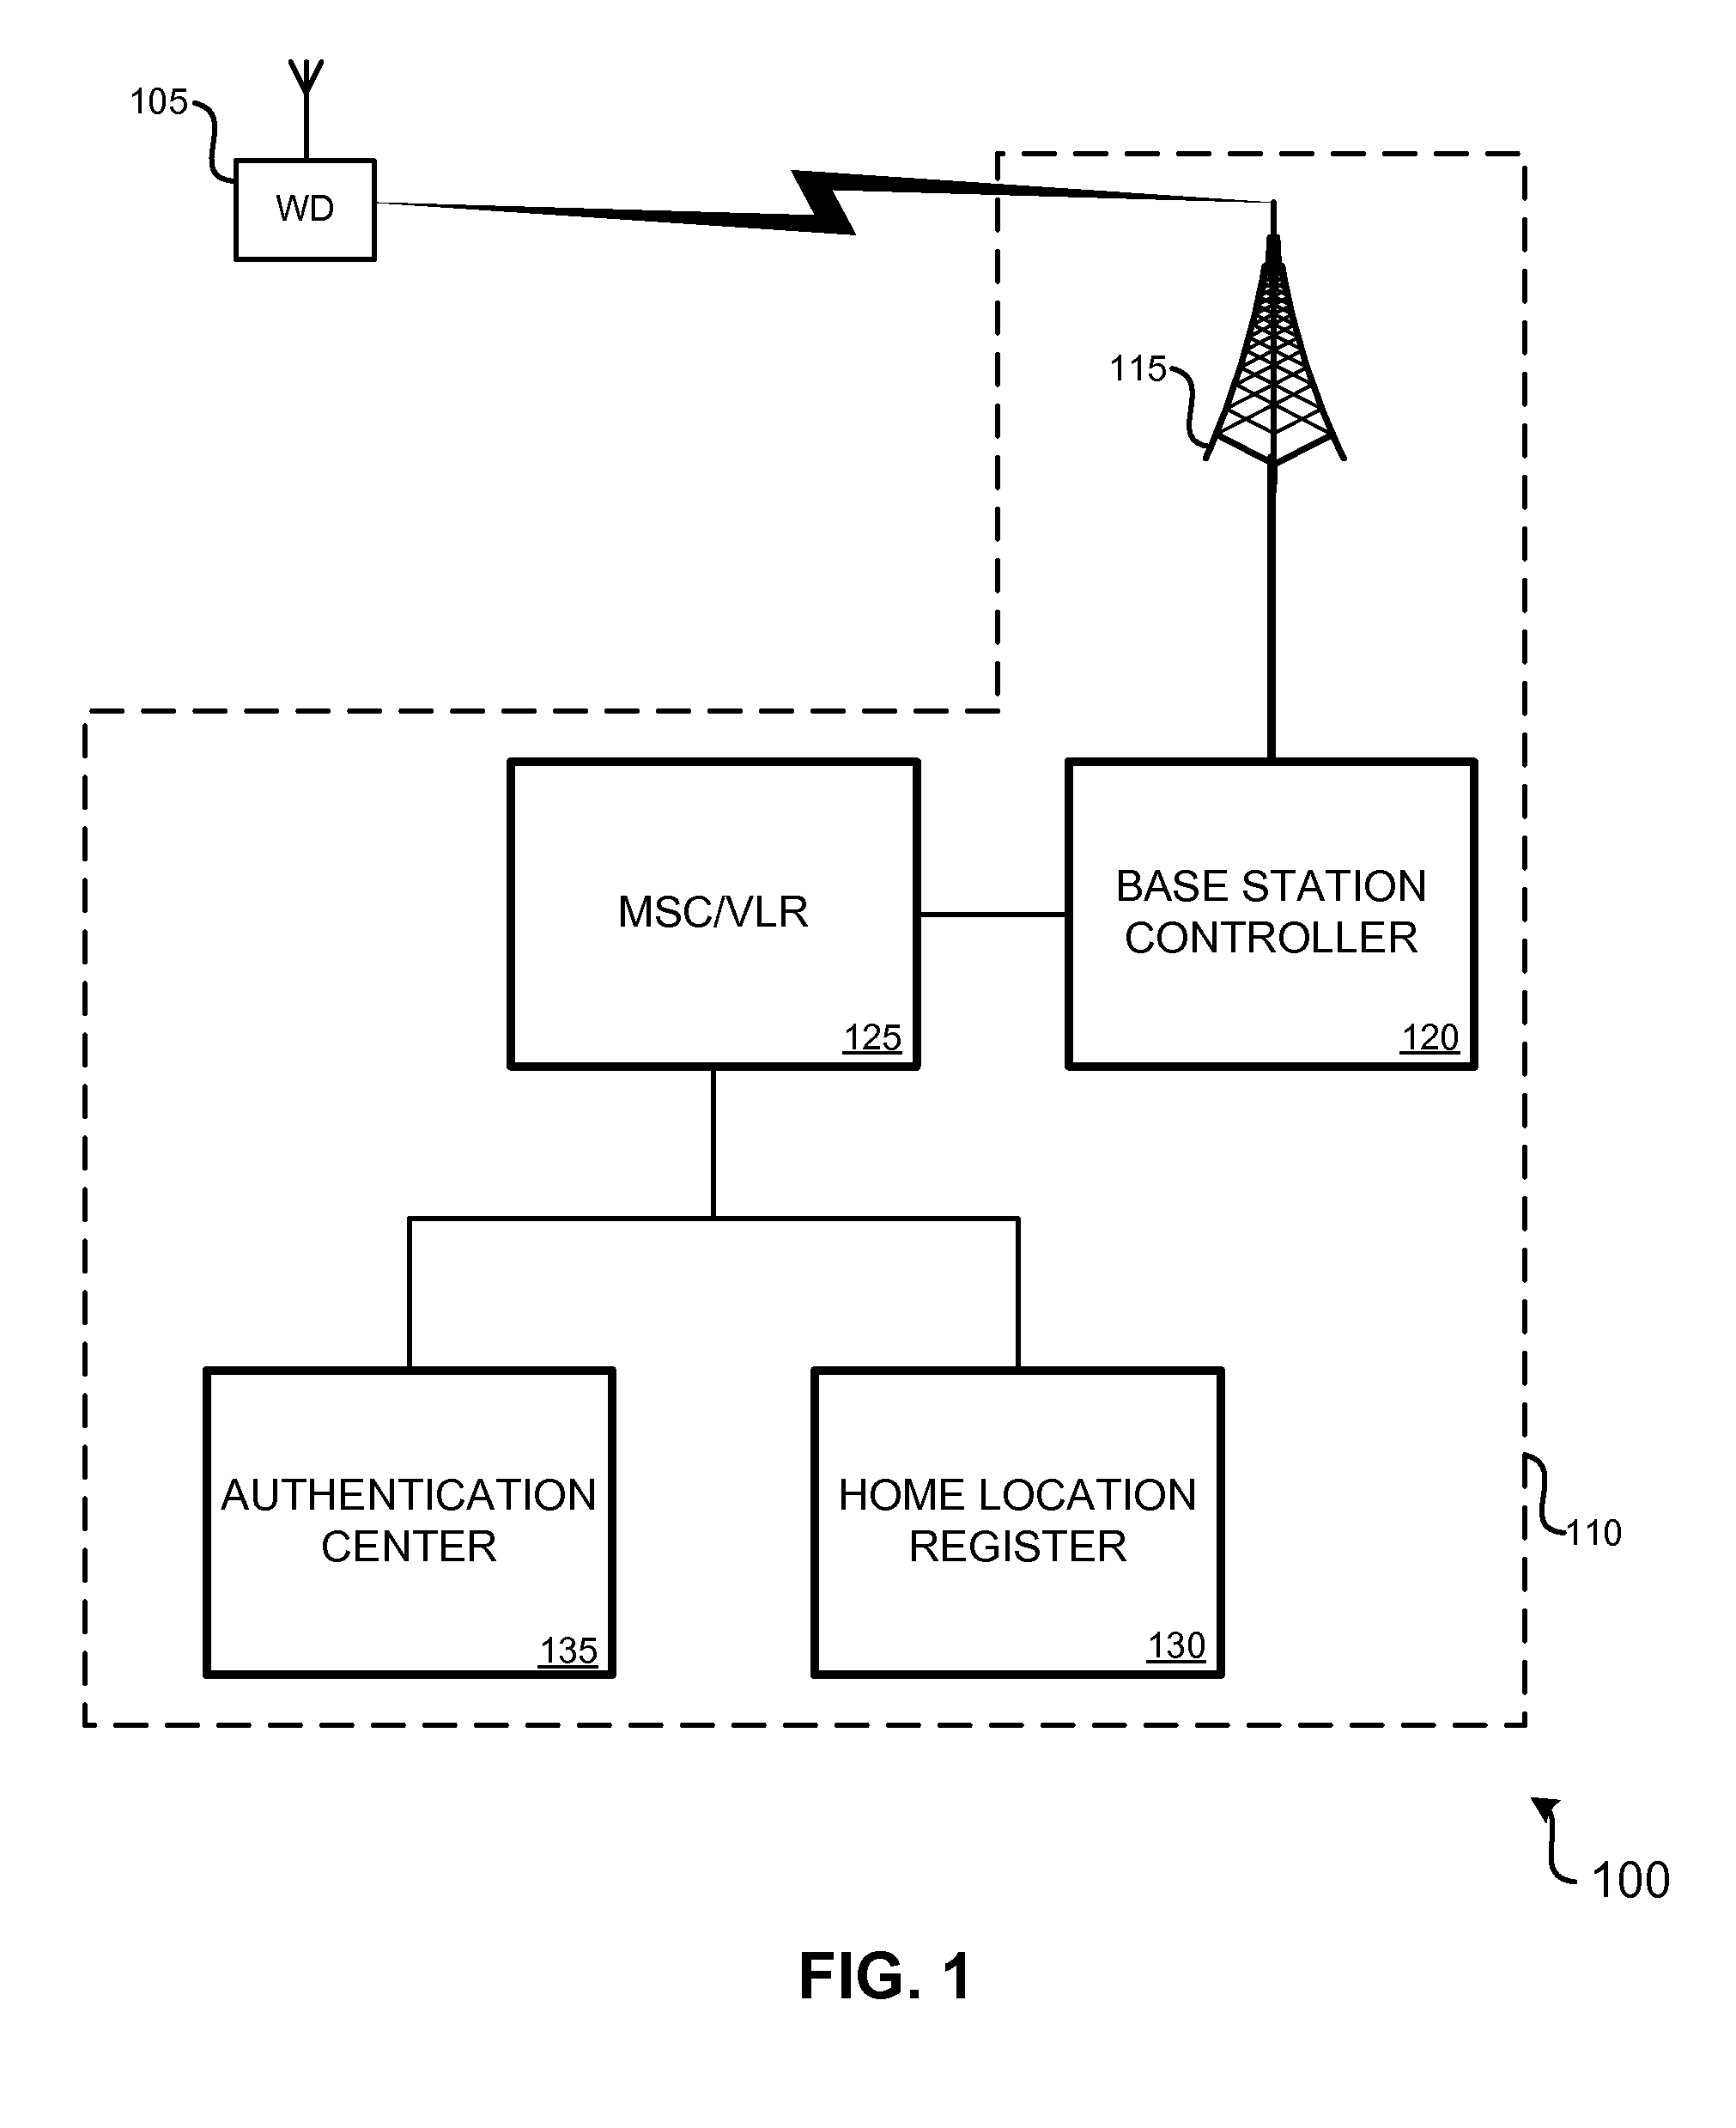 Controlled access to a wireless network